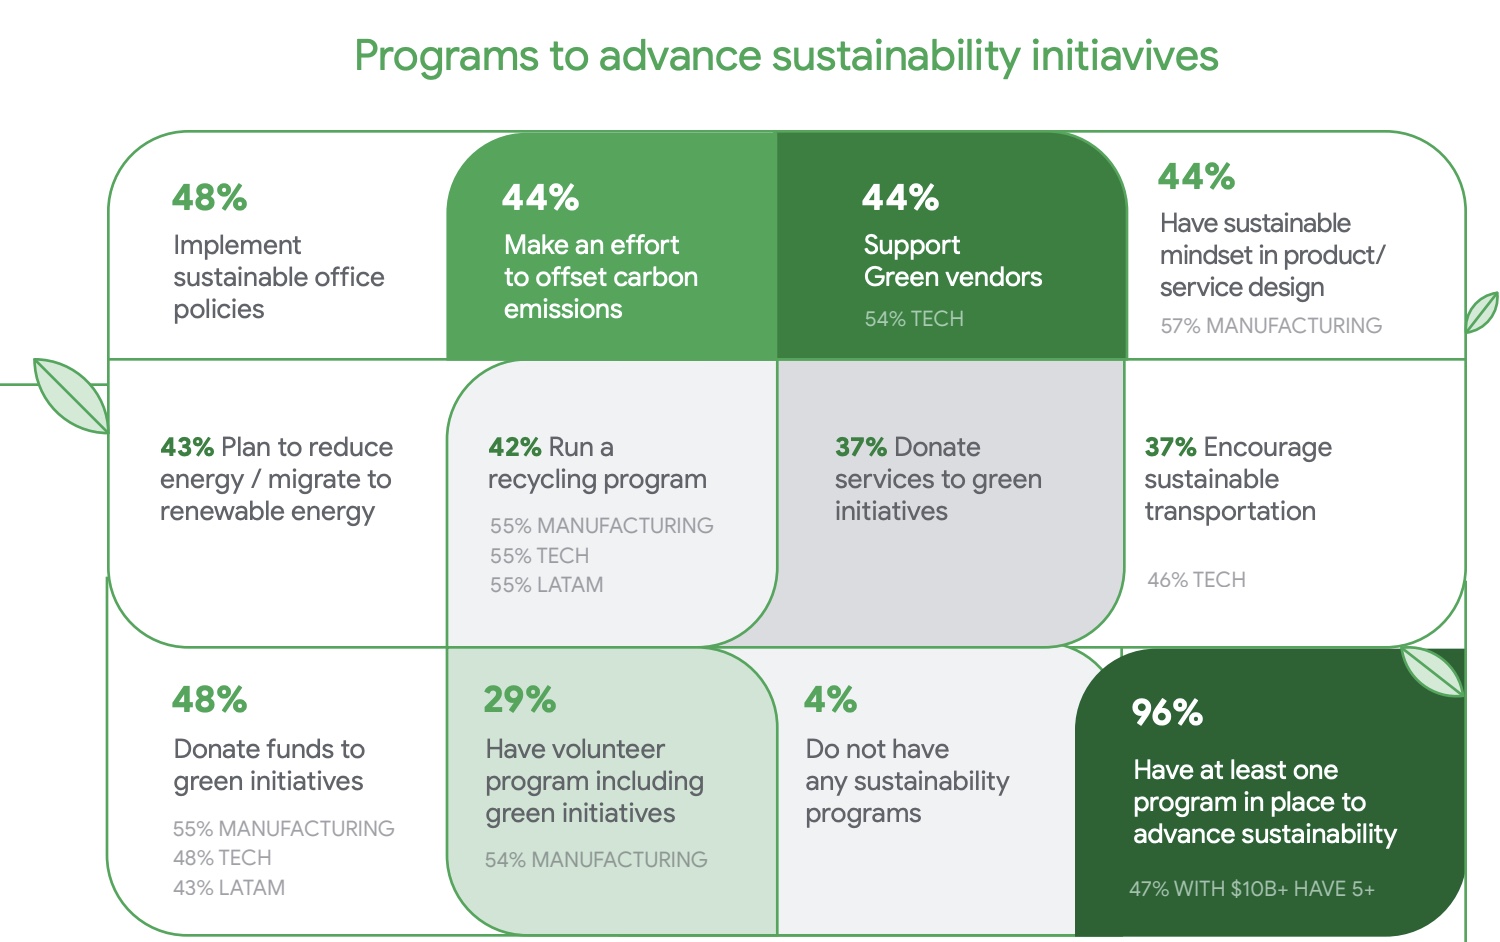 Programs for advancing sustainability.